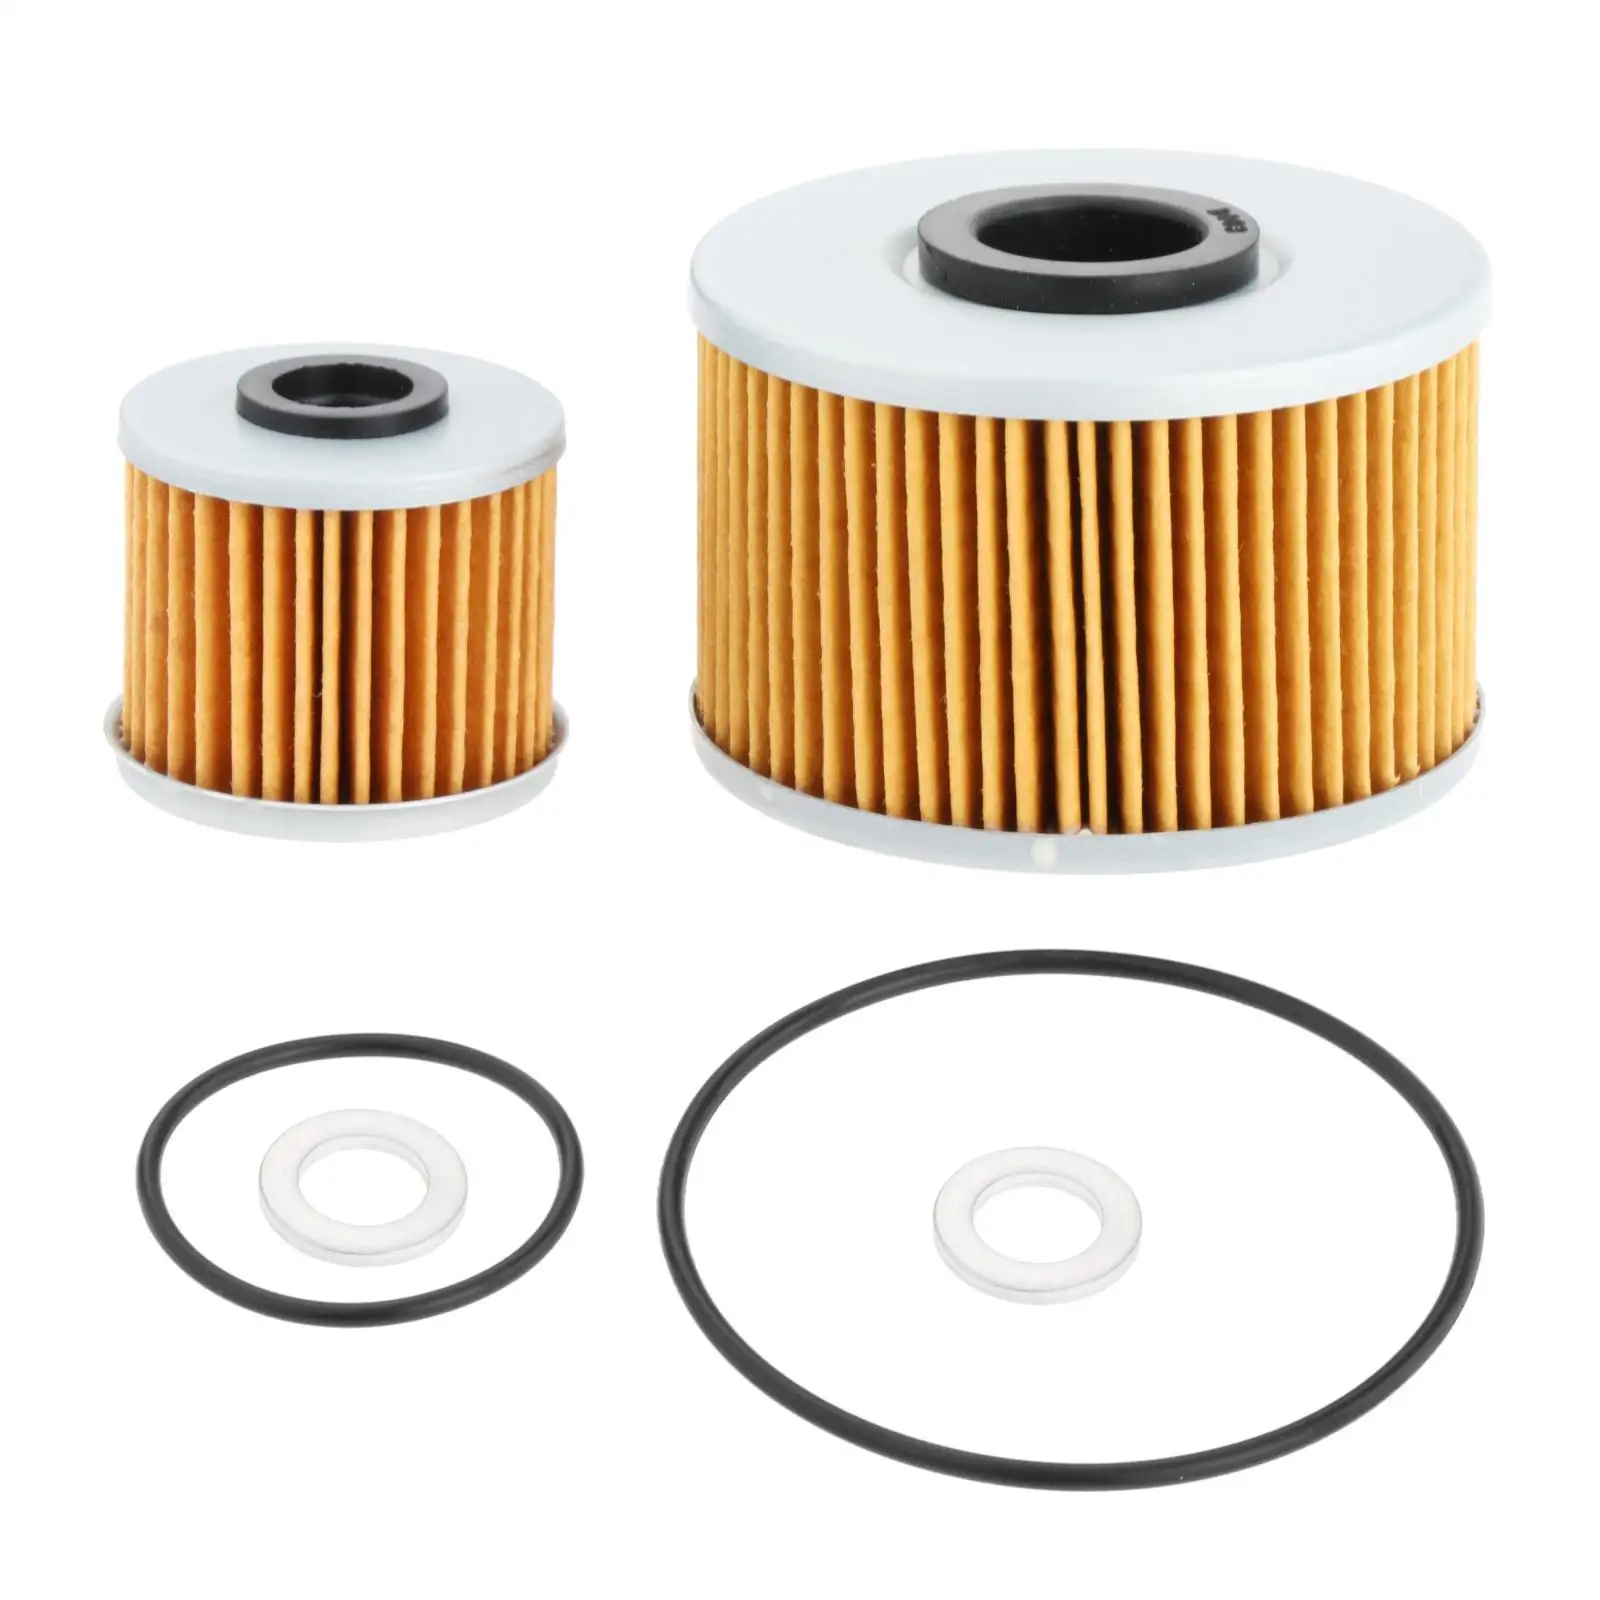 Oil Filter Replace Set 15412HP7A01 15412Mgsd21 Washers for Honda TRX420